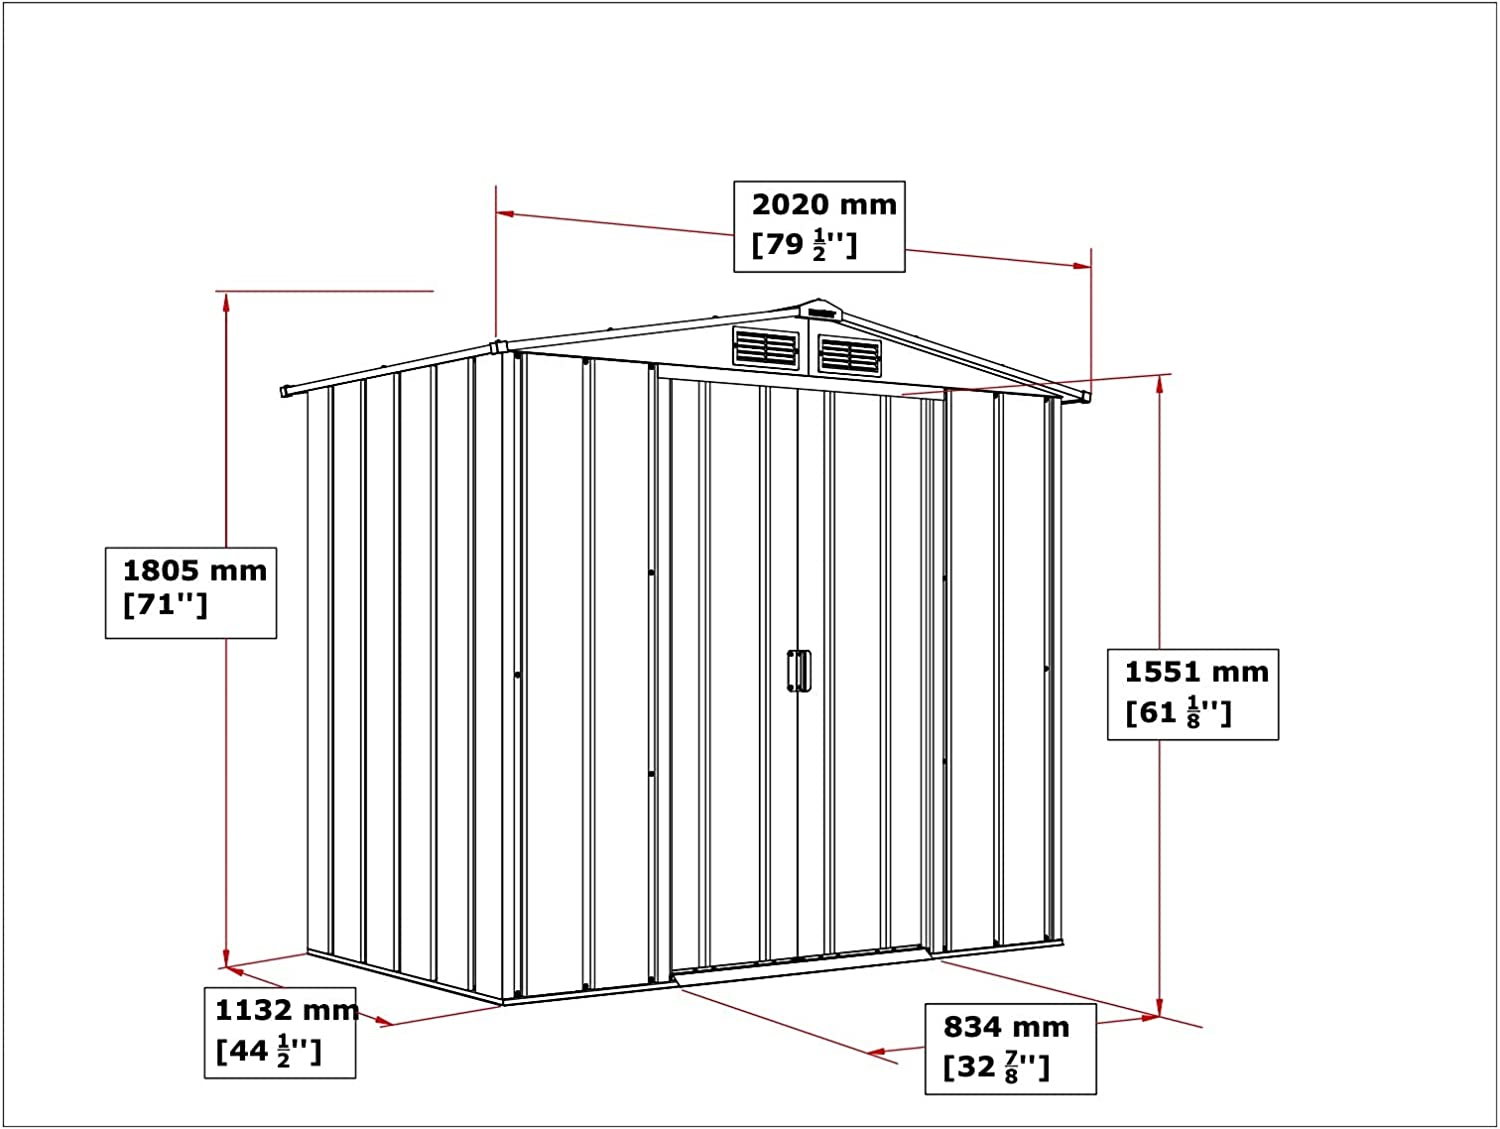  DURAMAX ECO METAL SHED 6X4FT GREEN